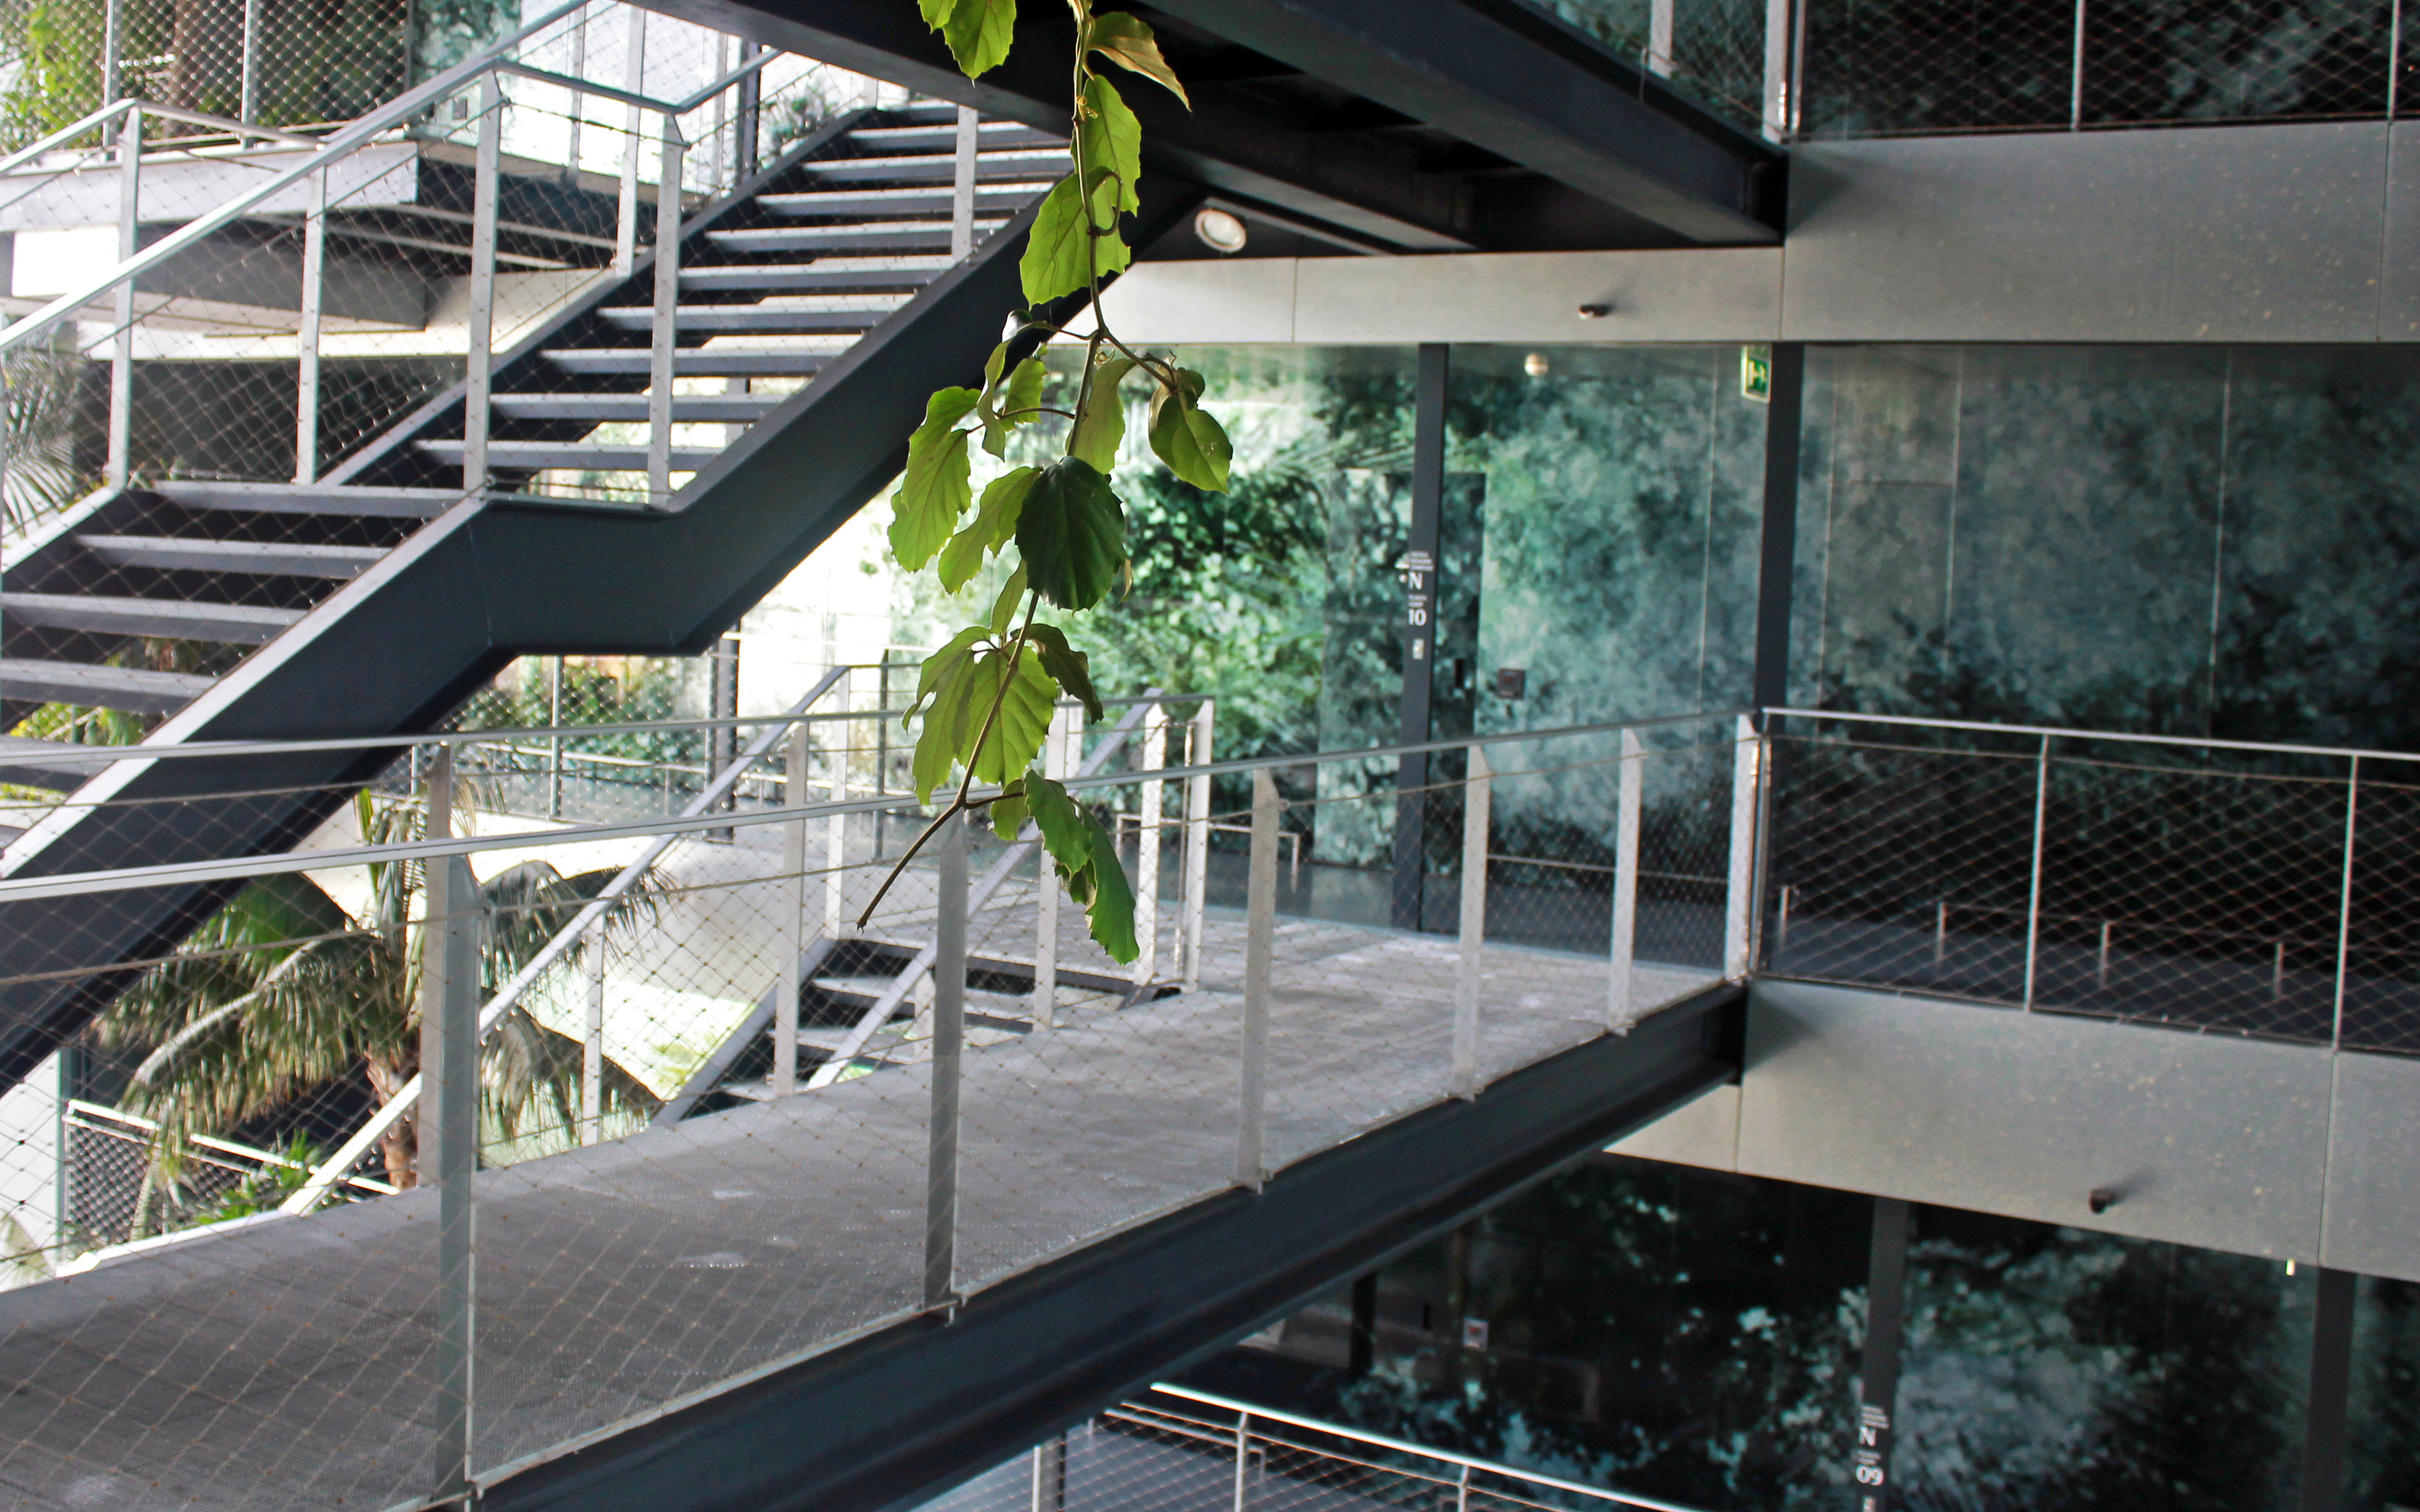 Stairways surrounded by tropical plants